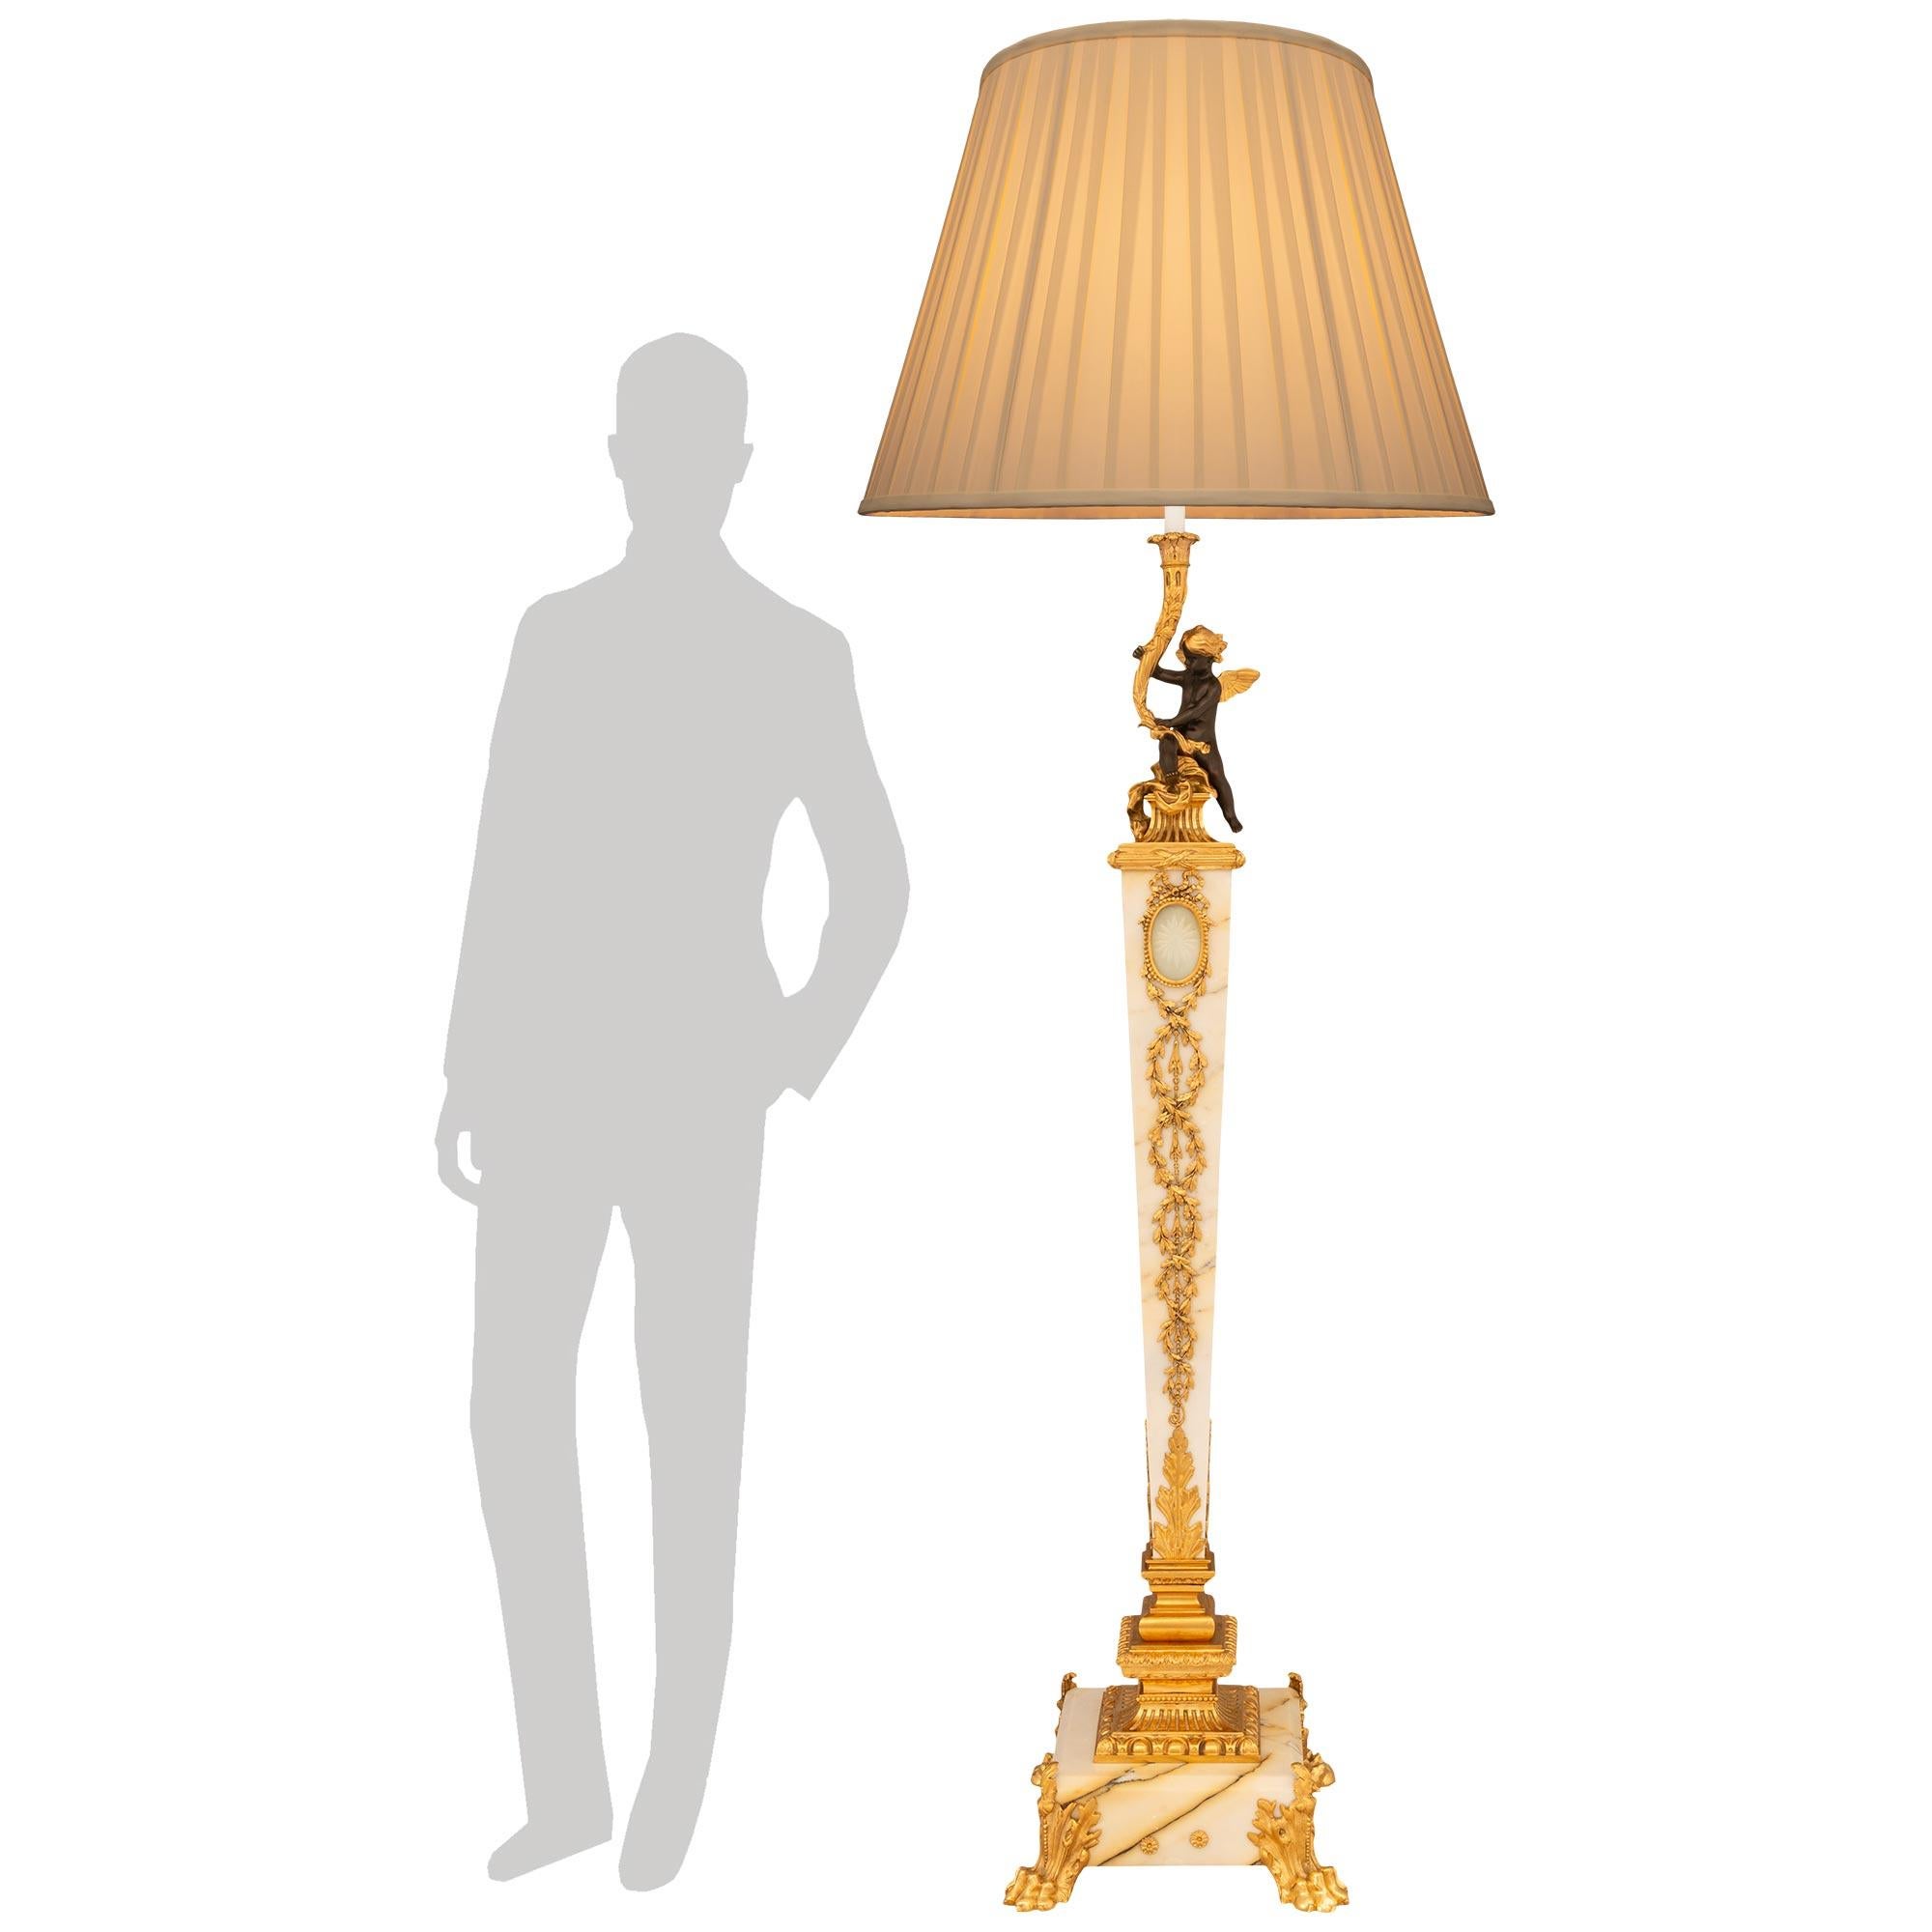 A most elegant and highly detailed French 19th century Louis XVI st. Ormolu, patinated Bronze, etched Crystal and Giallo Antico marble Torchière floor lamp. The floor lamp is raised on a square Giallo Antico marble base with four Ormolu foliate paw